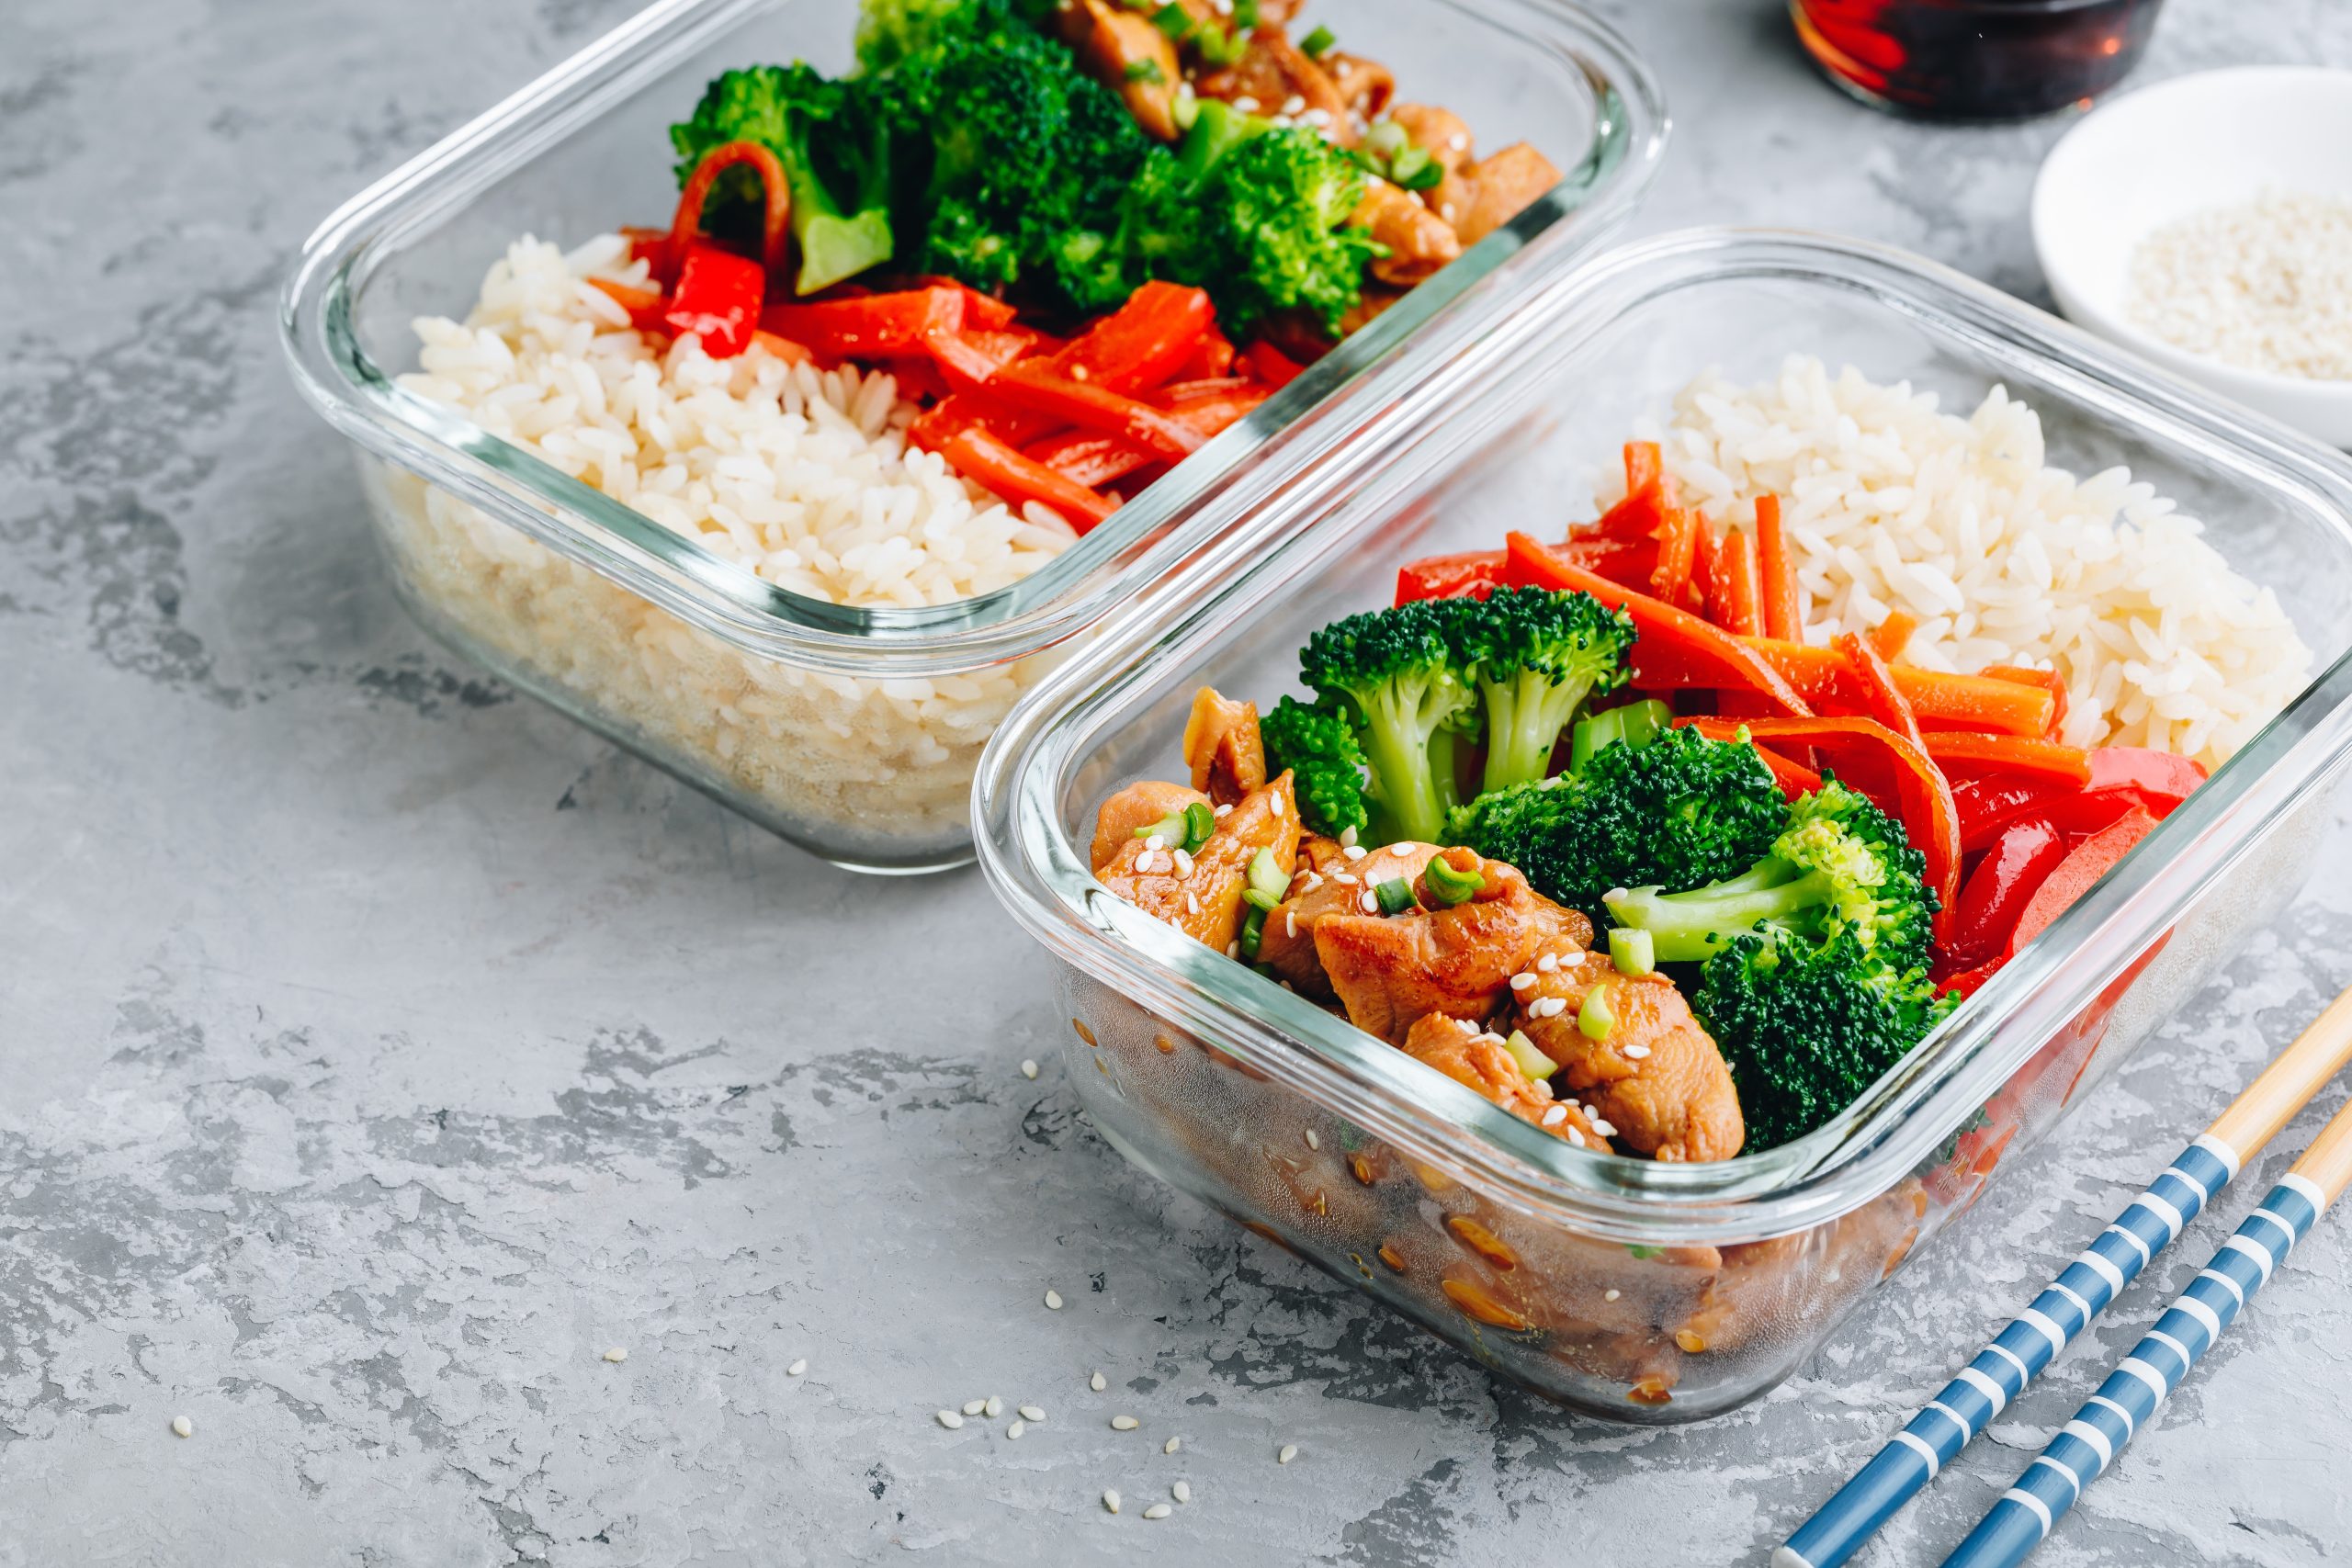 Chicken teriyaki stir fry meal prep lunch box containers with broccoli, rice and carrots | FitMeals4U